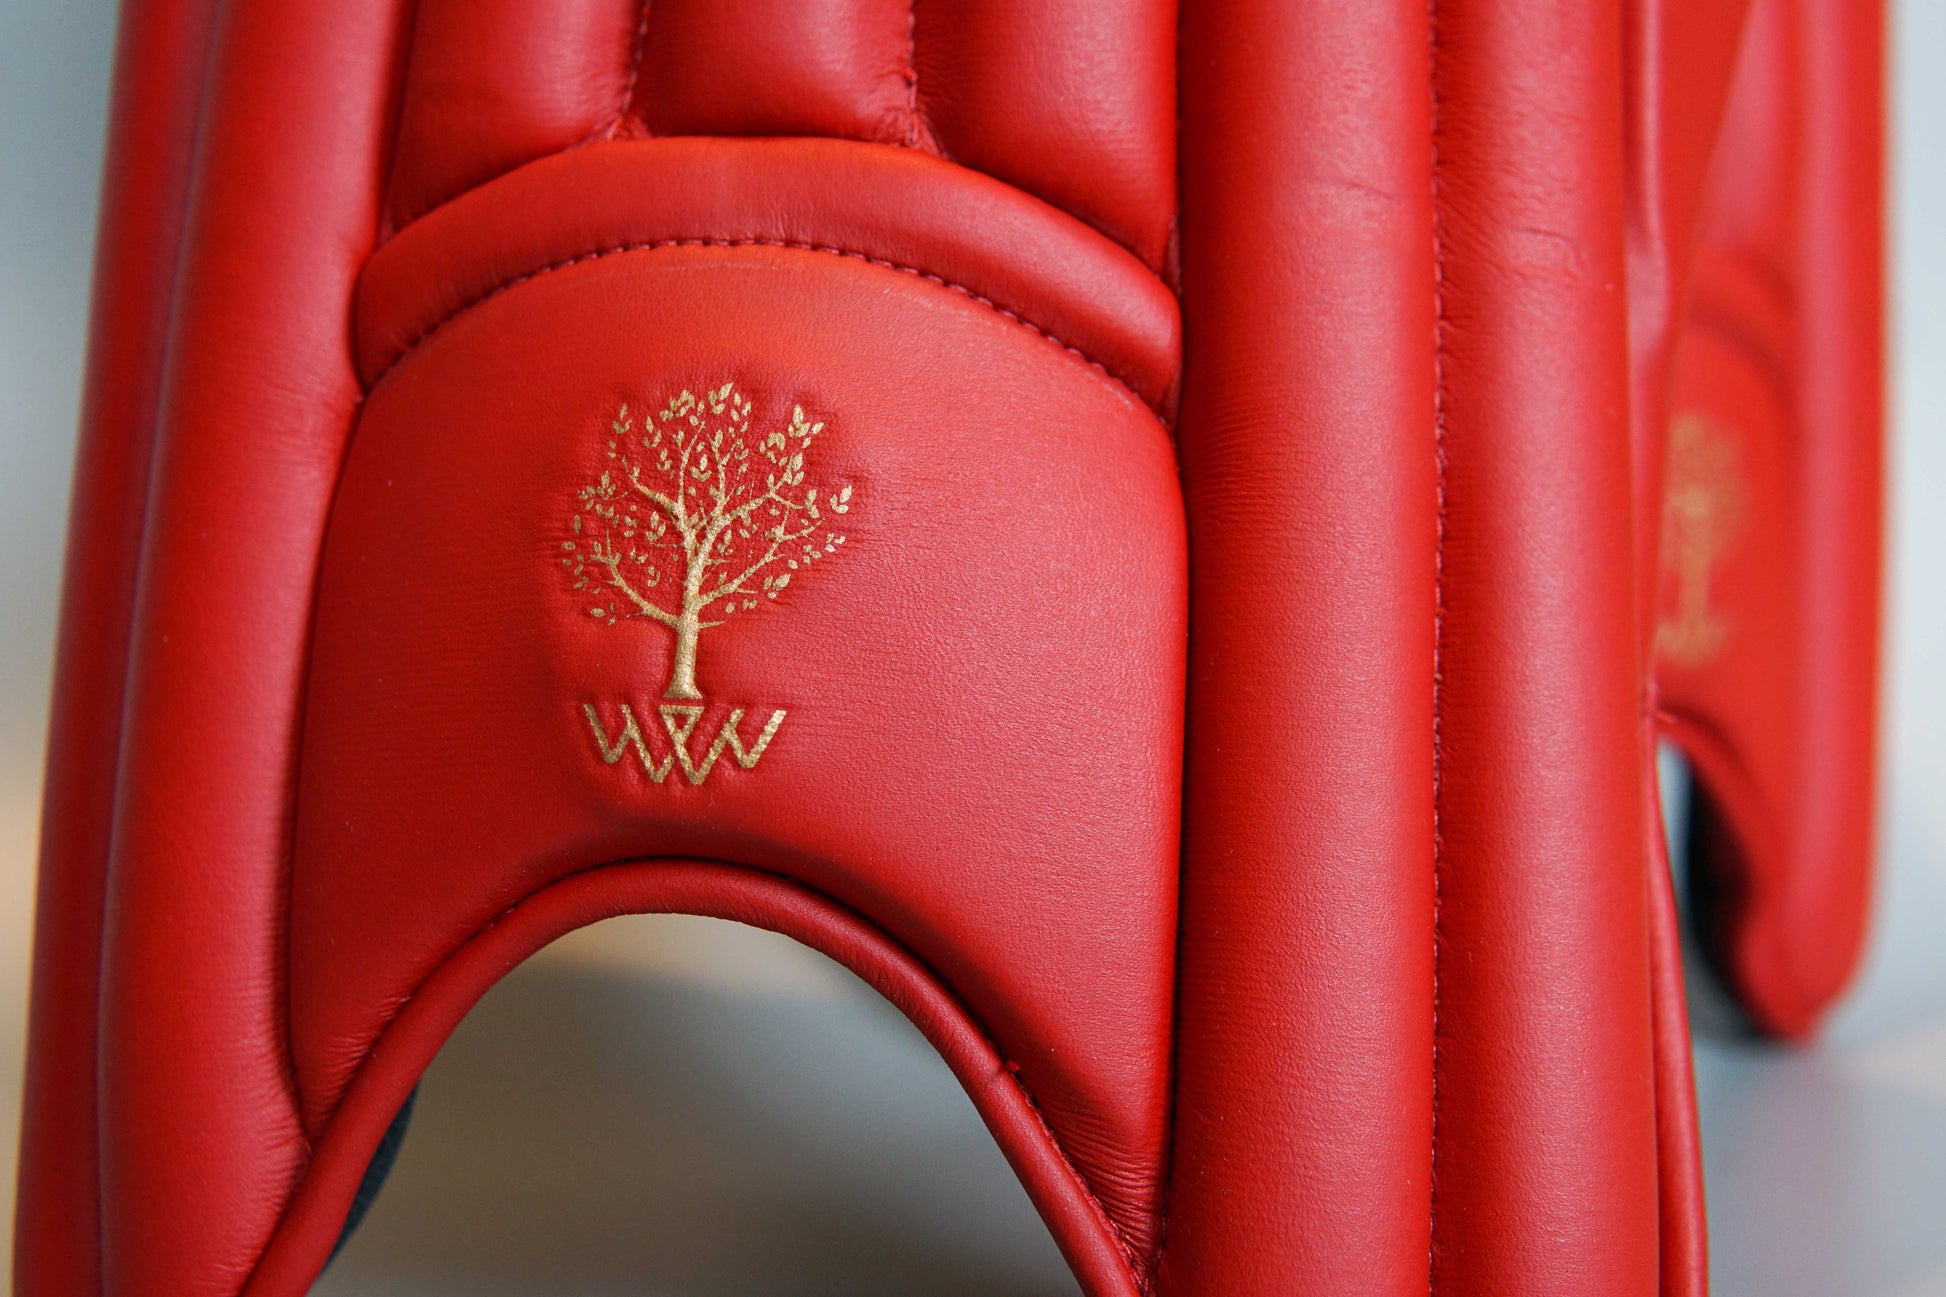 Willow Twin logo on front of red pads